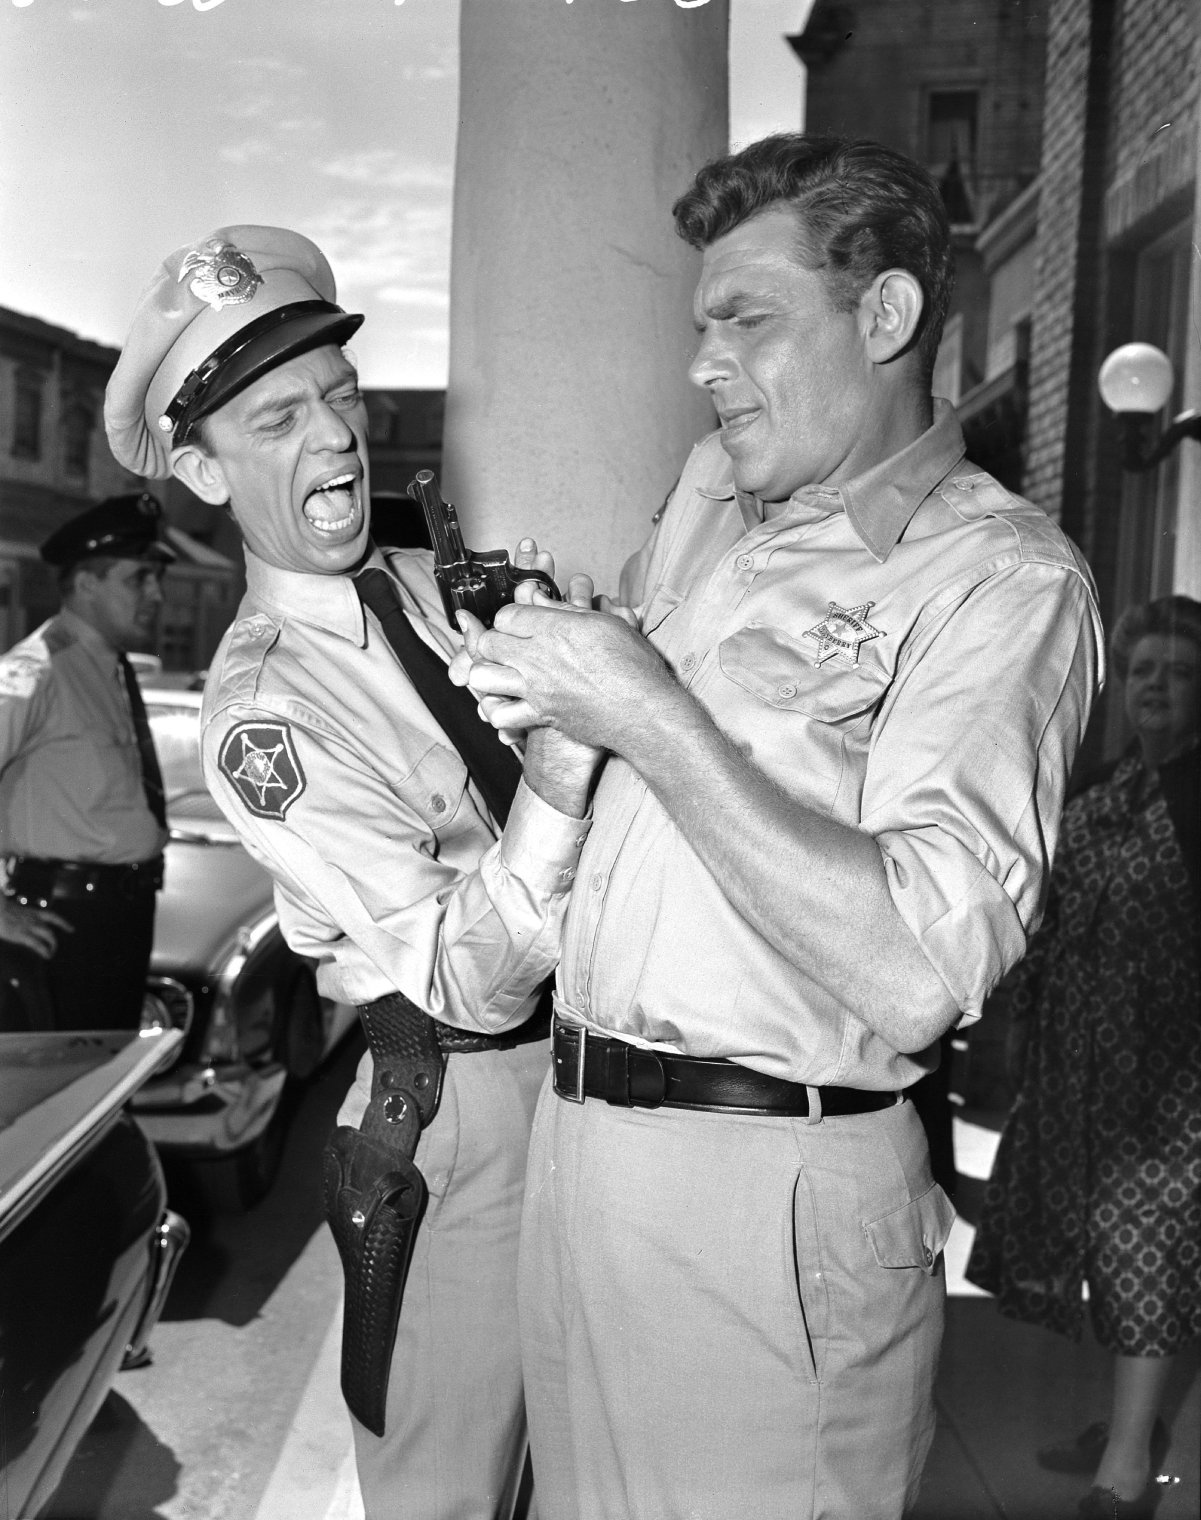 Don Knotts as Barney Fife and Andy Griffith as Sheriff Andy Taylor fumble over a gun in a scene from 'The Andy Griffith Show,' 1960